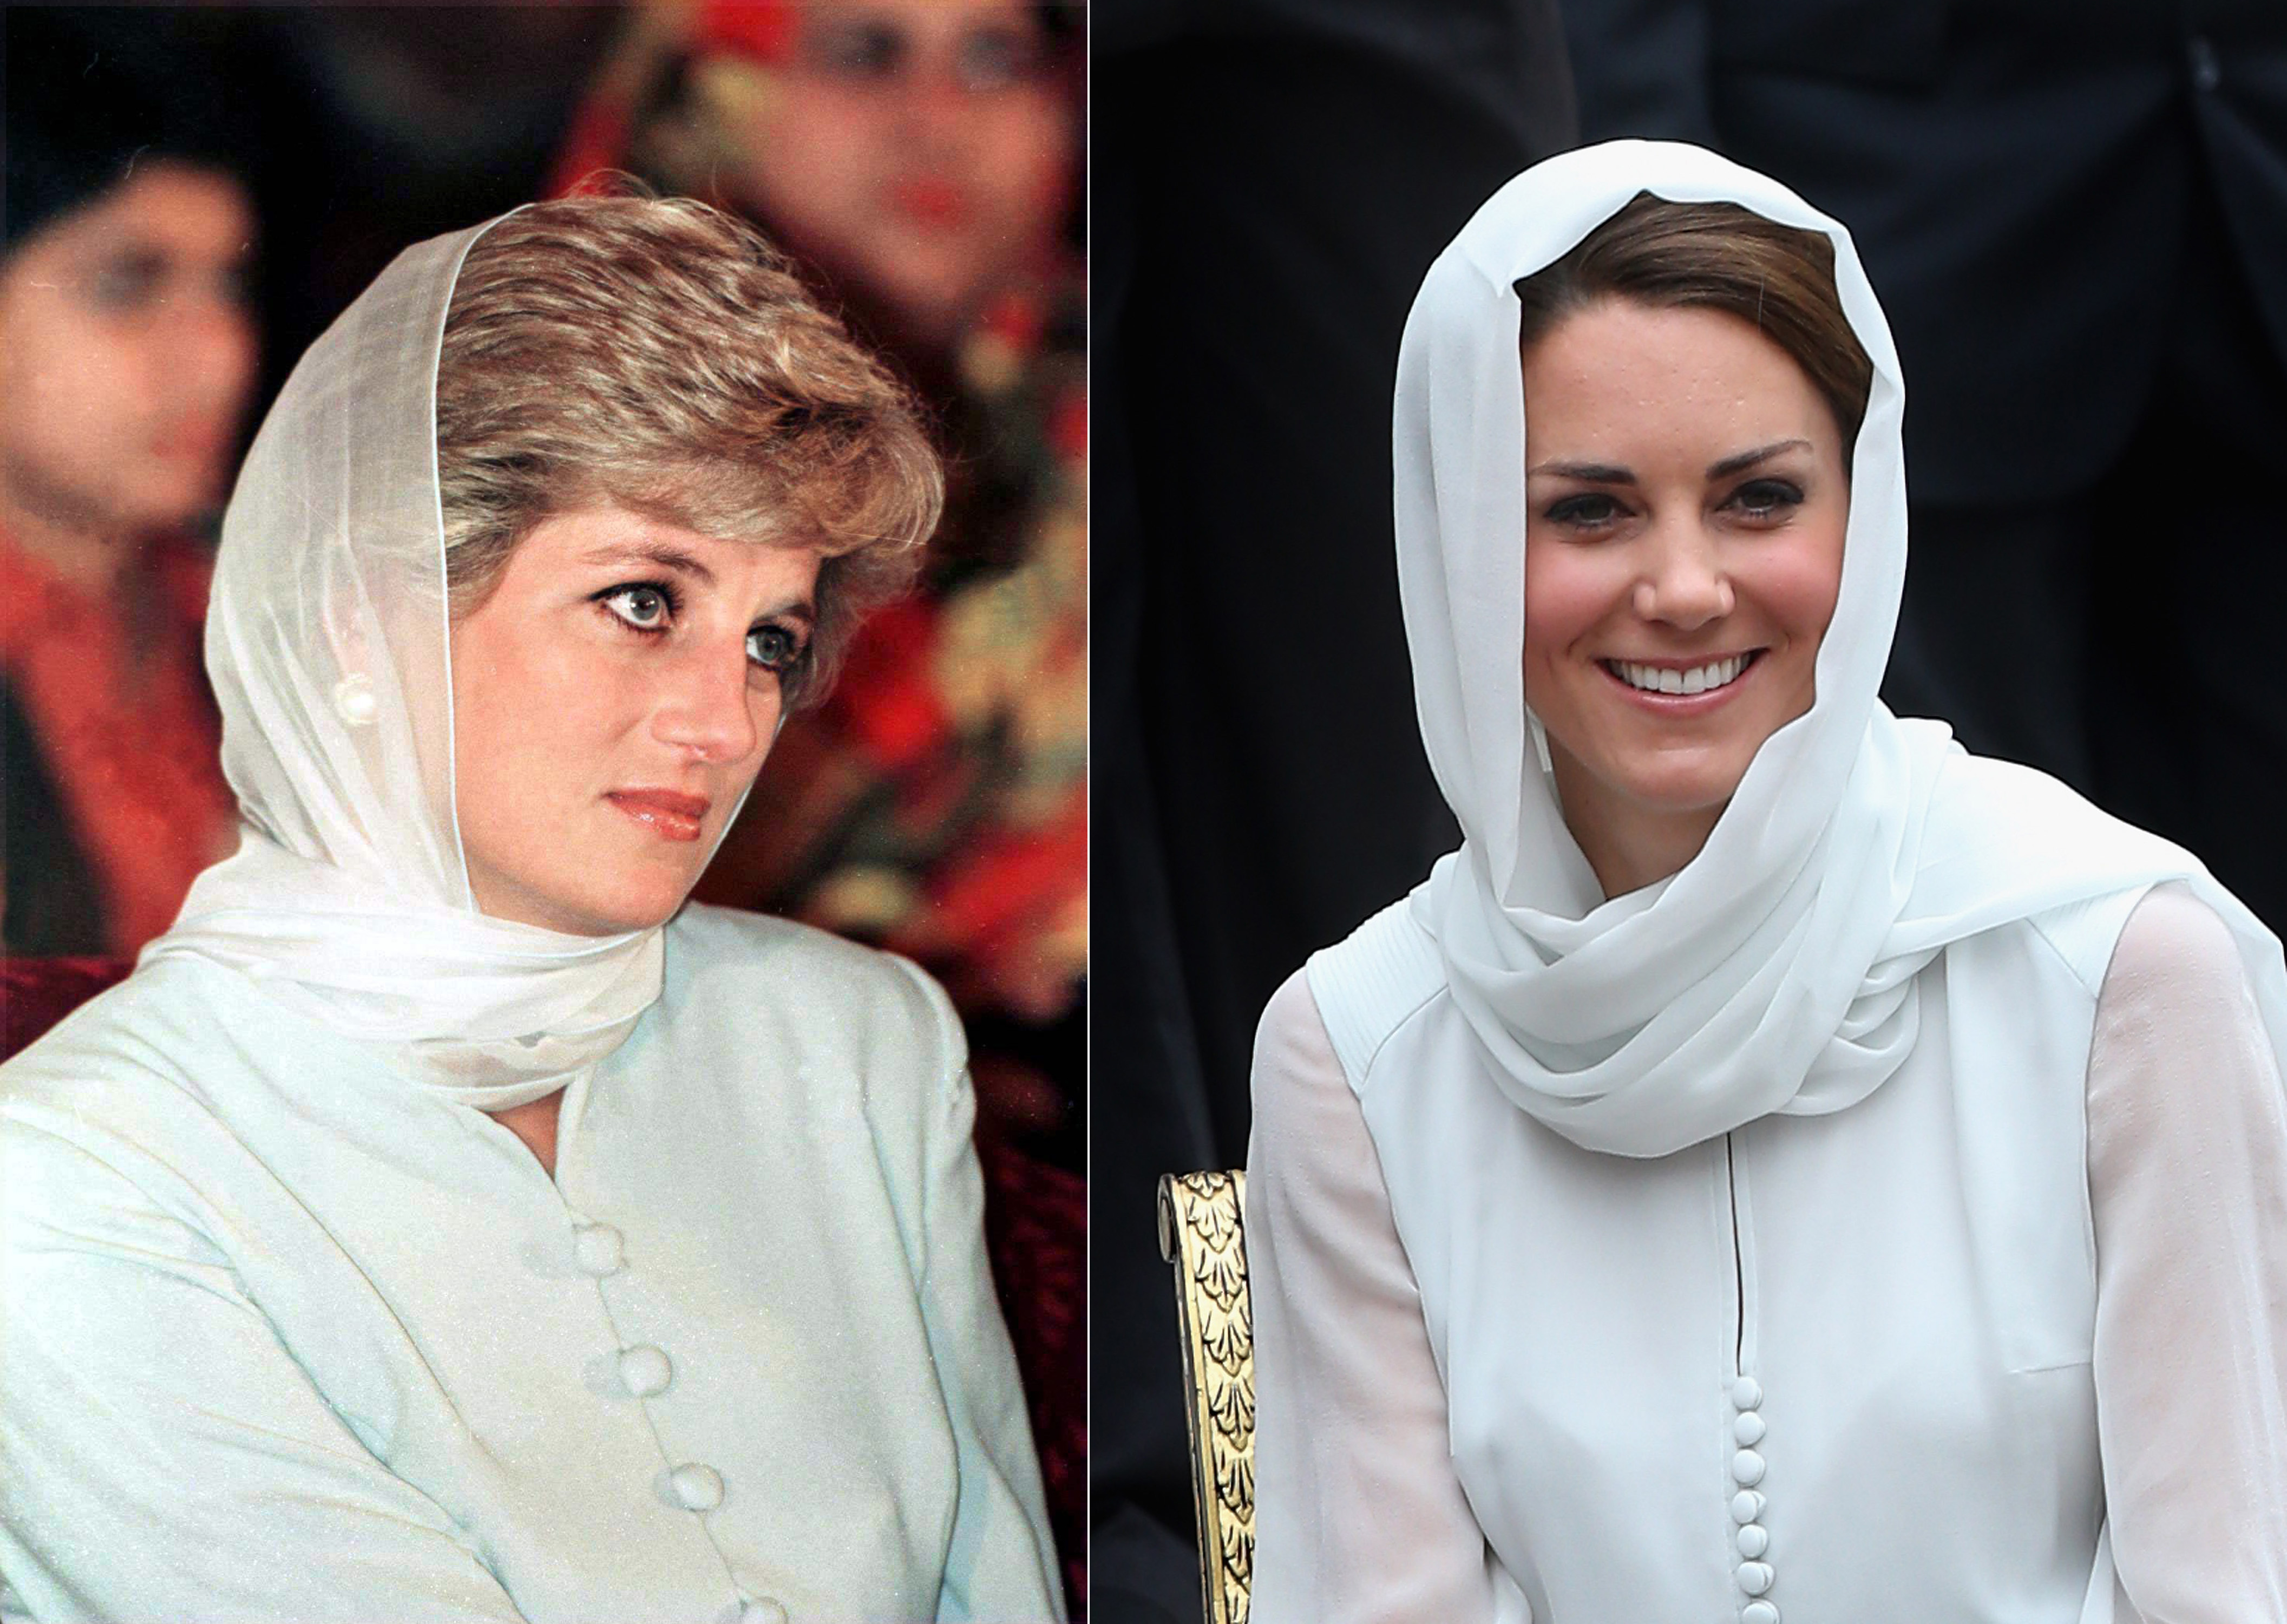 Composite image comparison between Princess Diana (L) and Kate Middleton (R) donning headscarves during royal tours abroad